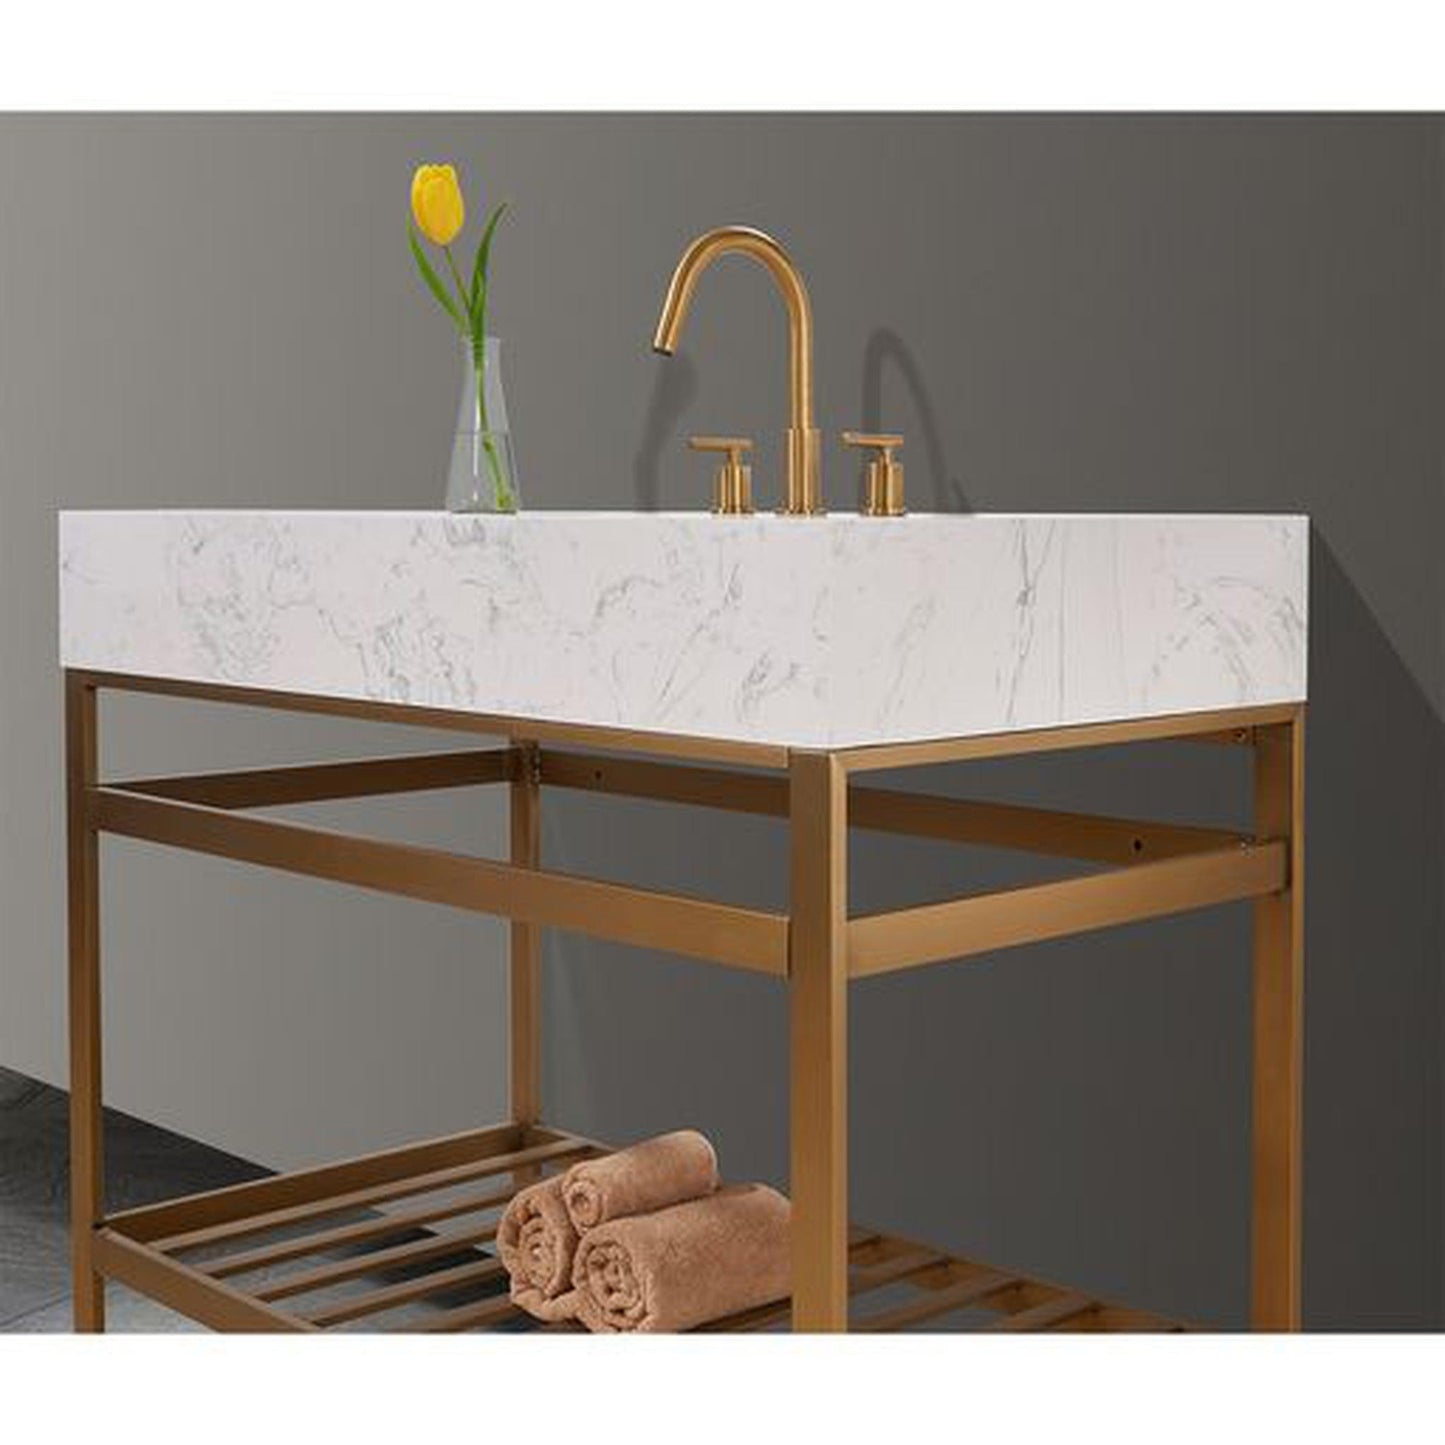 Altair Merano 42" Brushed Gold Single Stainless Steel Bathroom Vanity Set Console With Aosta White Stone Top, Single Rectangular Undermount Ceramic Sink, and Safety Overflow Hole